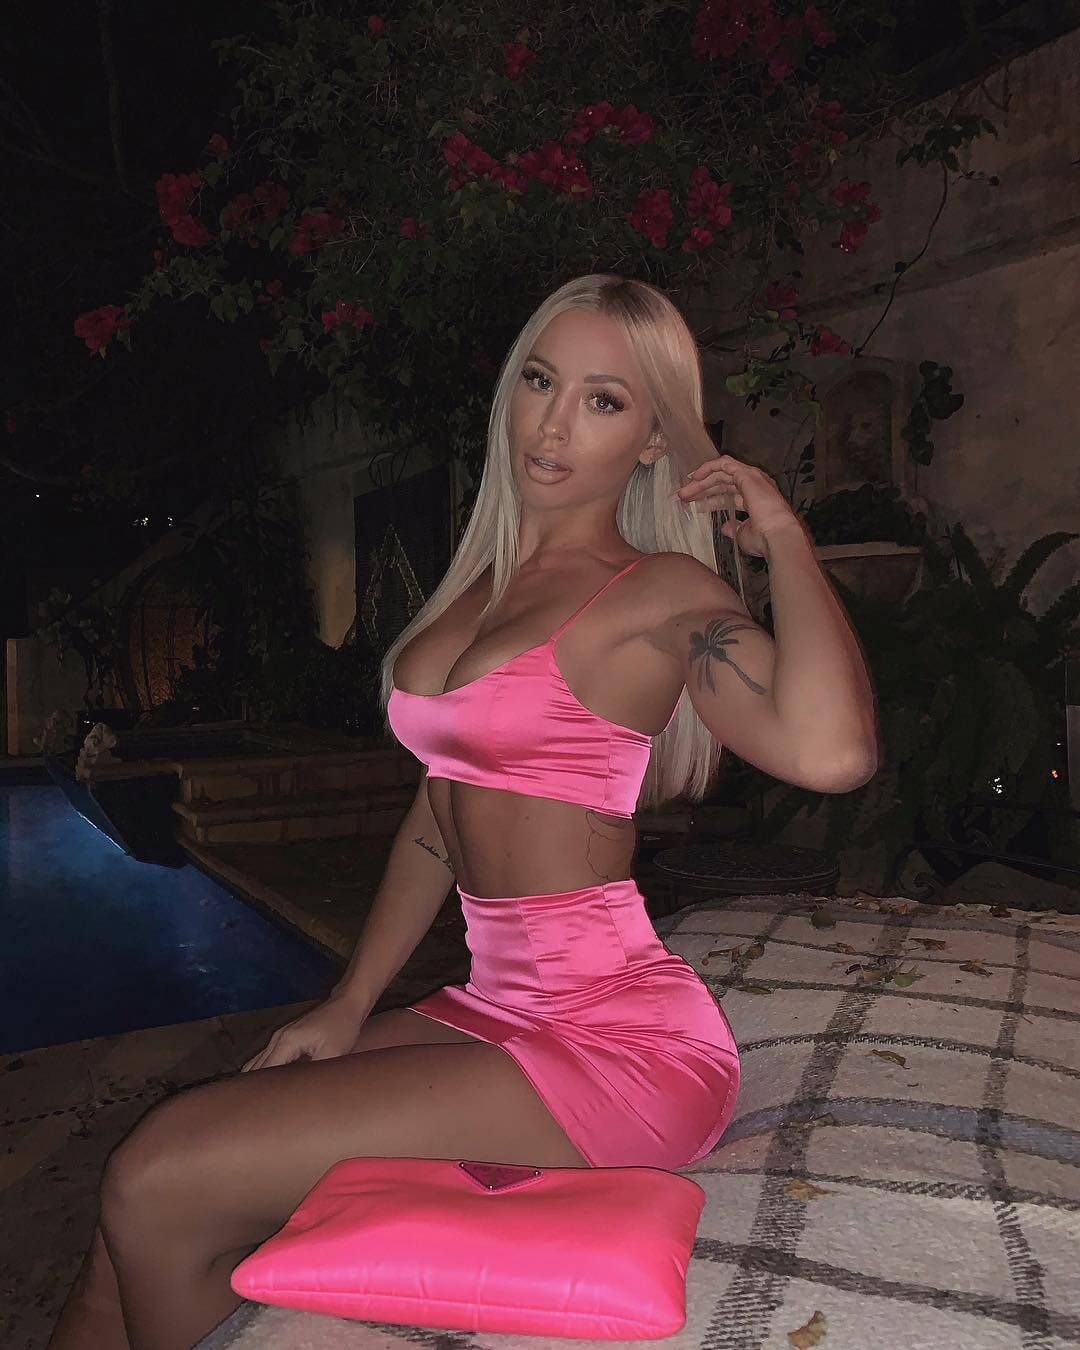 51 Hottest Tammy Hembrow Bikini Pictures That Are Basically Flawless | Best Of Comic Books